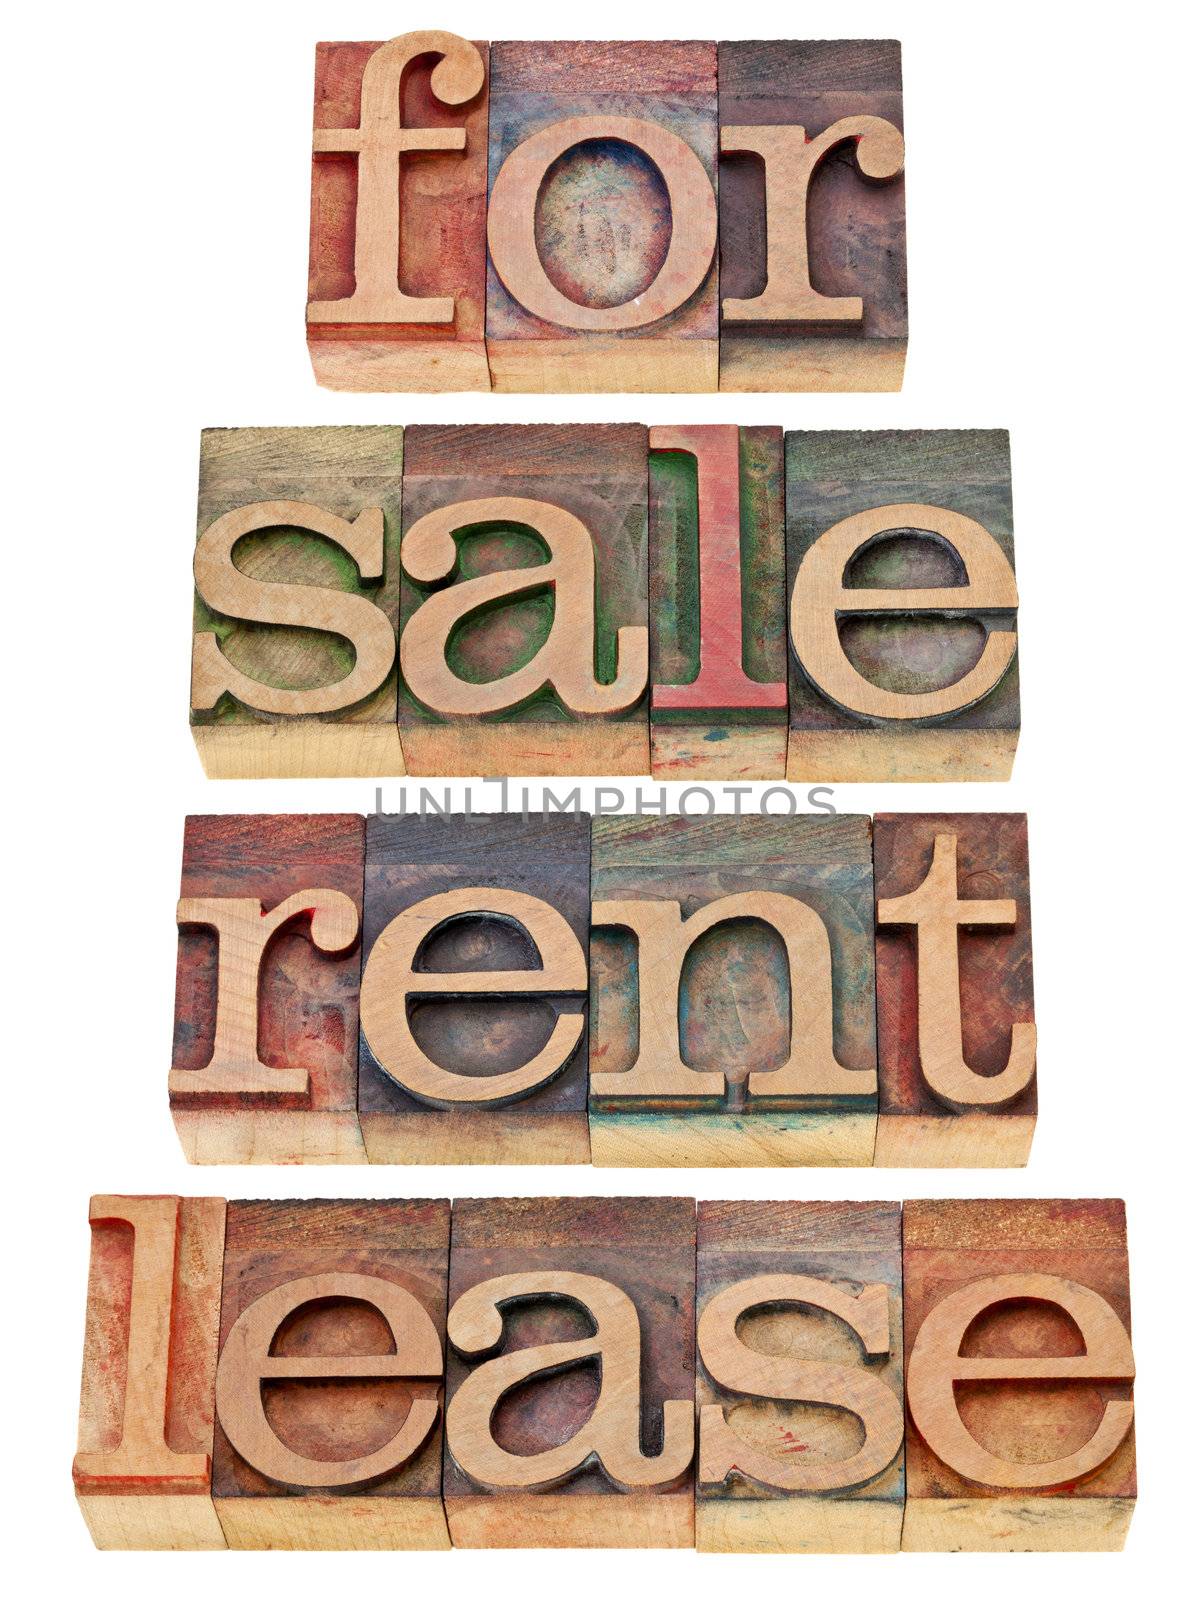 for sale, rent, lease by PixelsAway